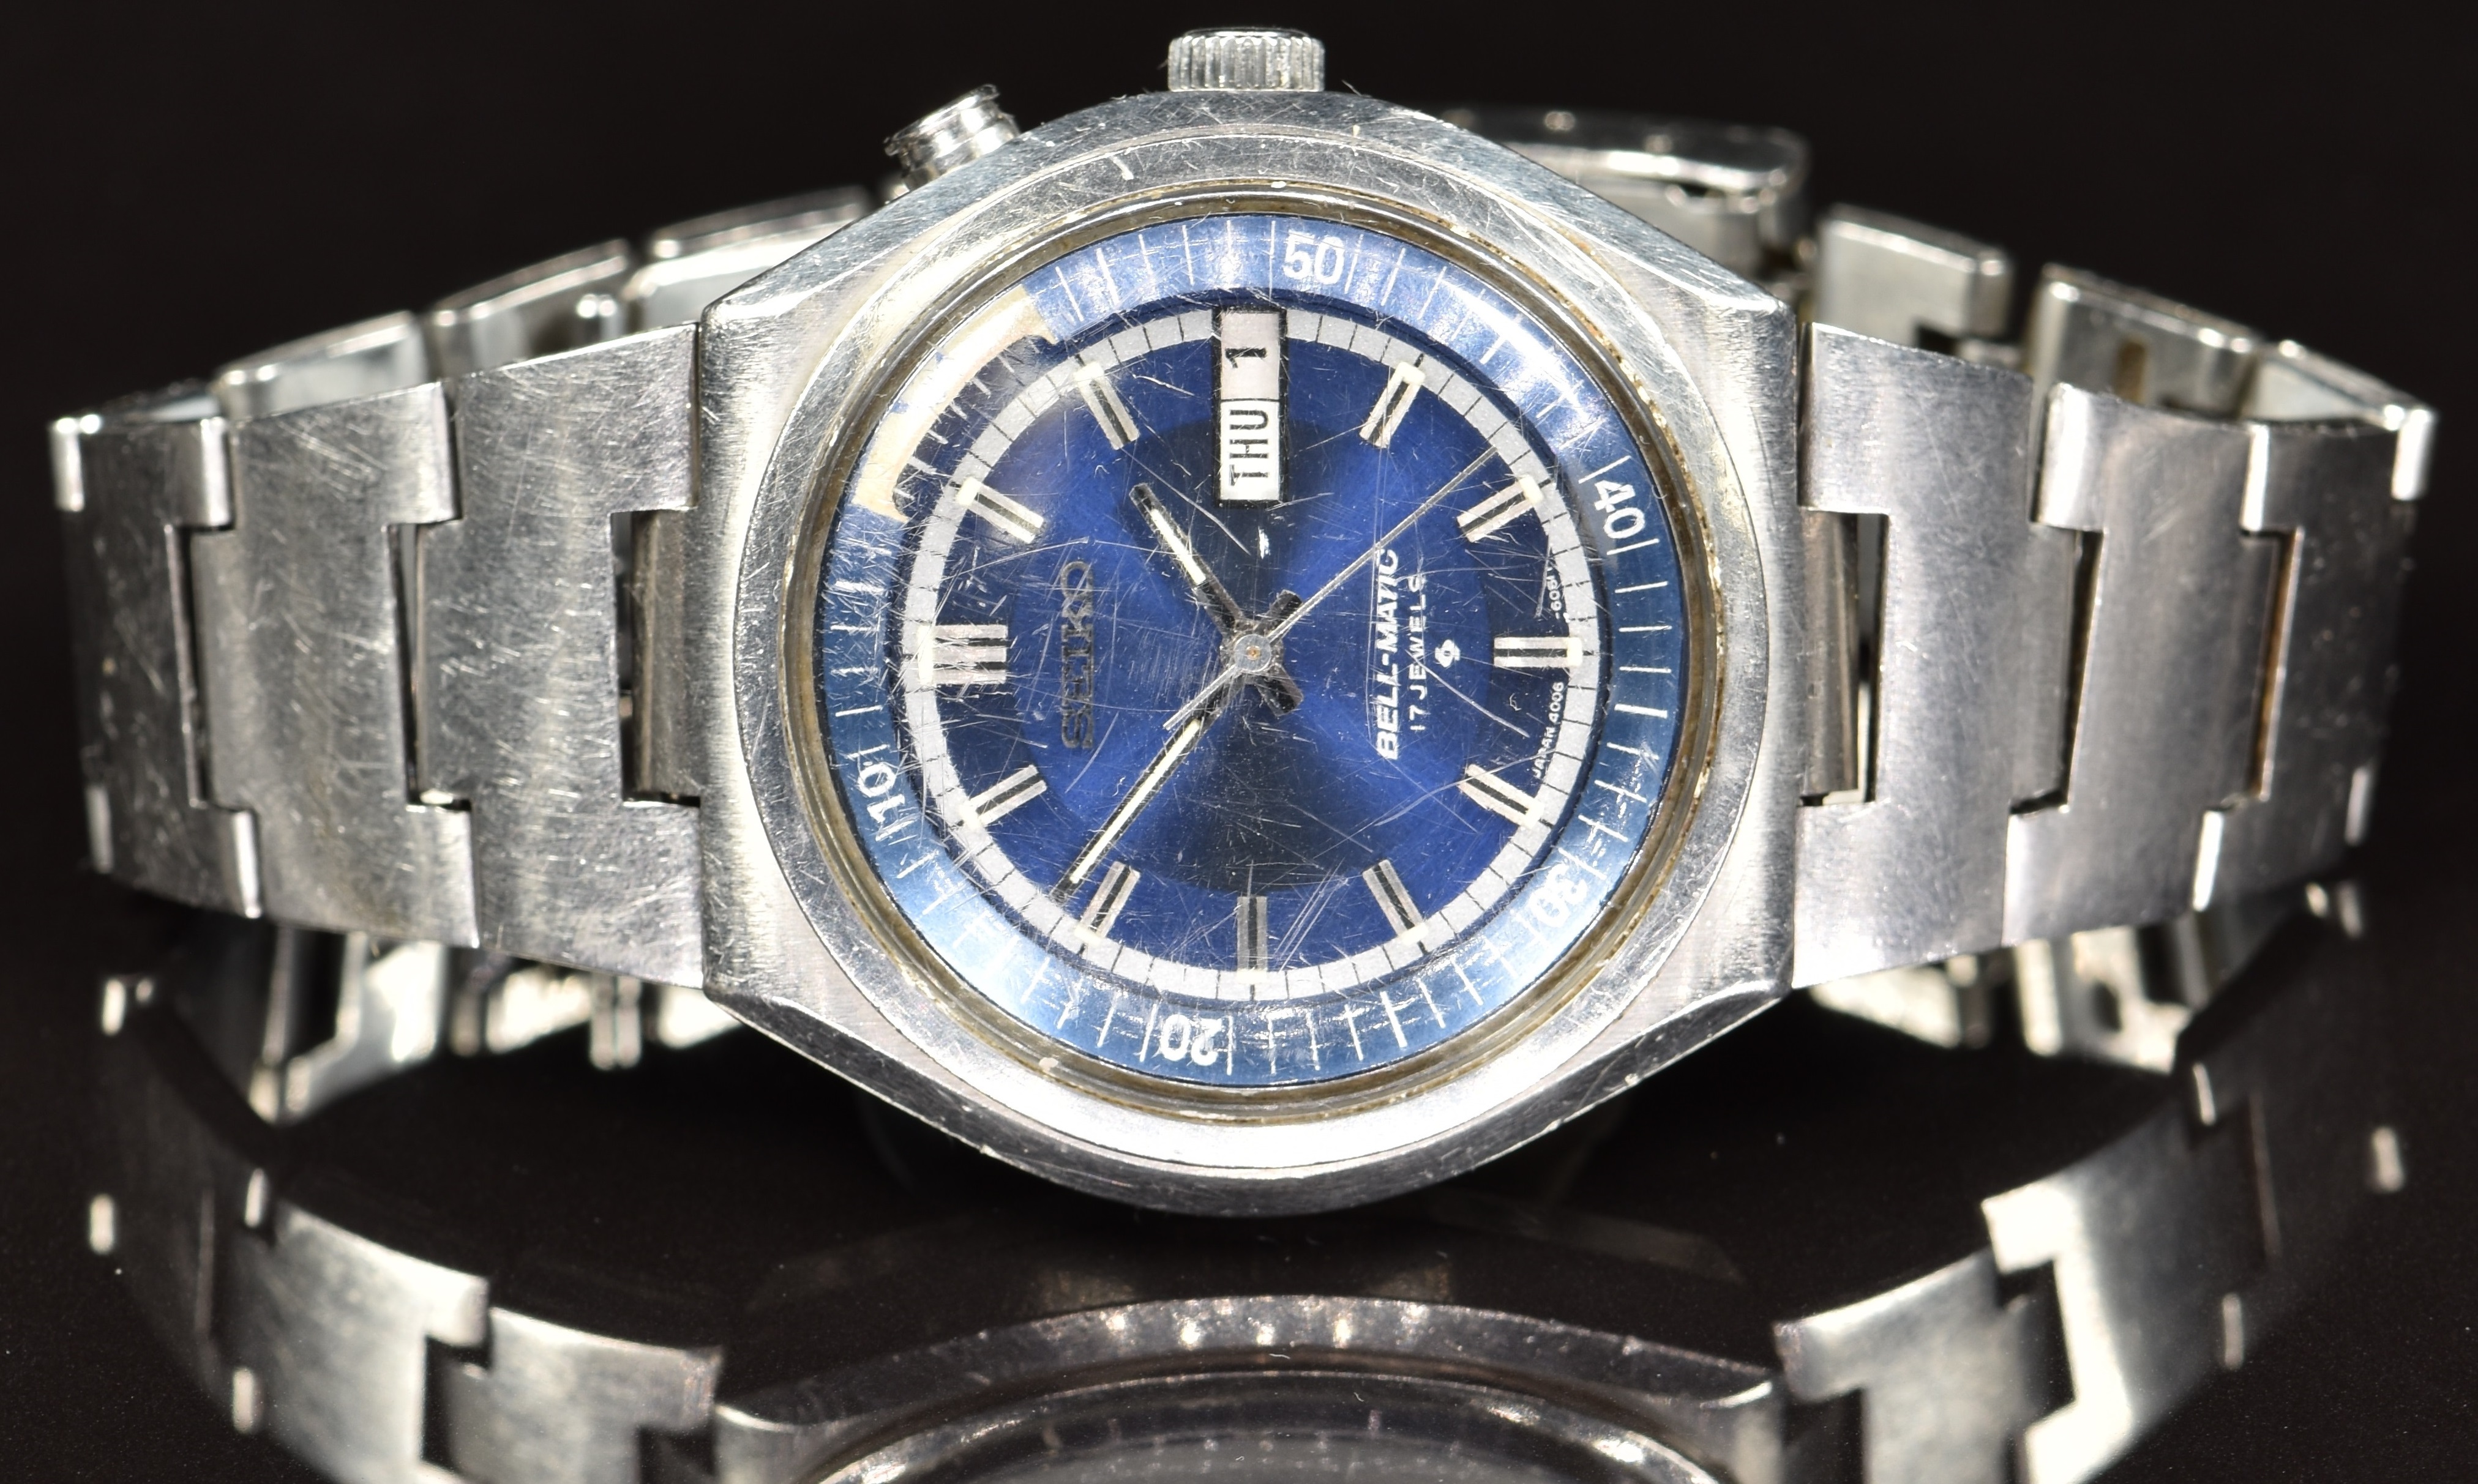 Seiko Bell-Matic gentleman's wristwatch ref. 4006-6040 with alarm, day and date aperture, luminous - Image 7 of 10